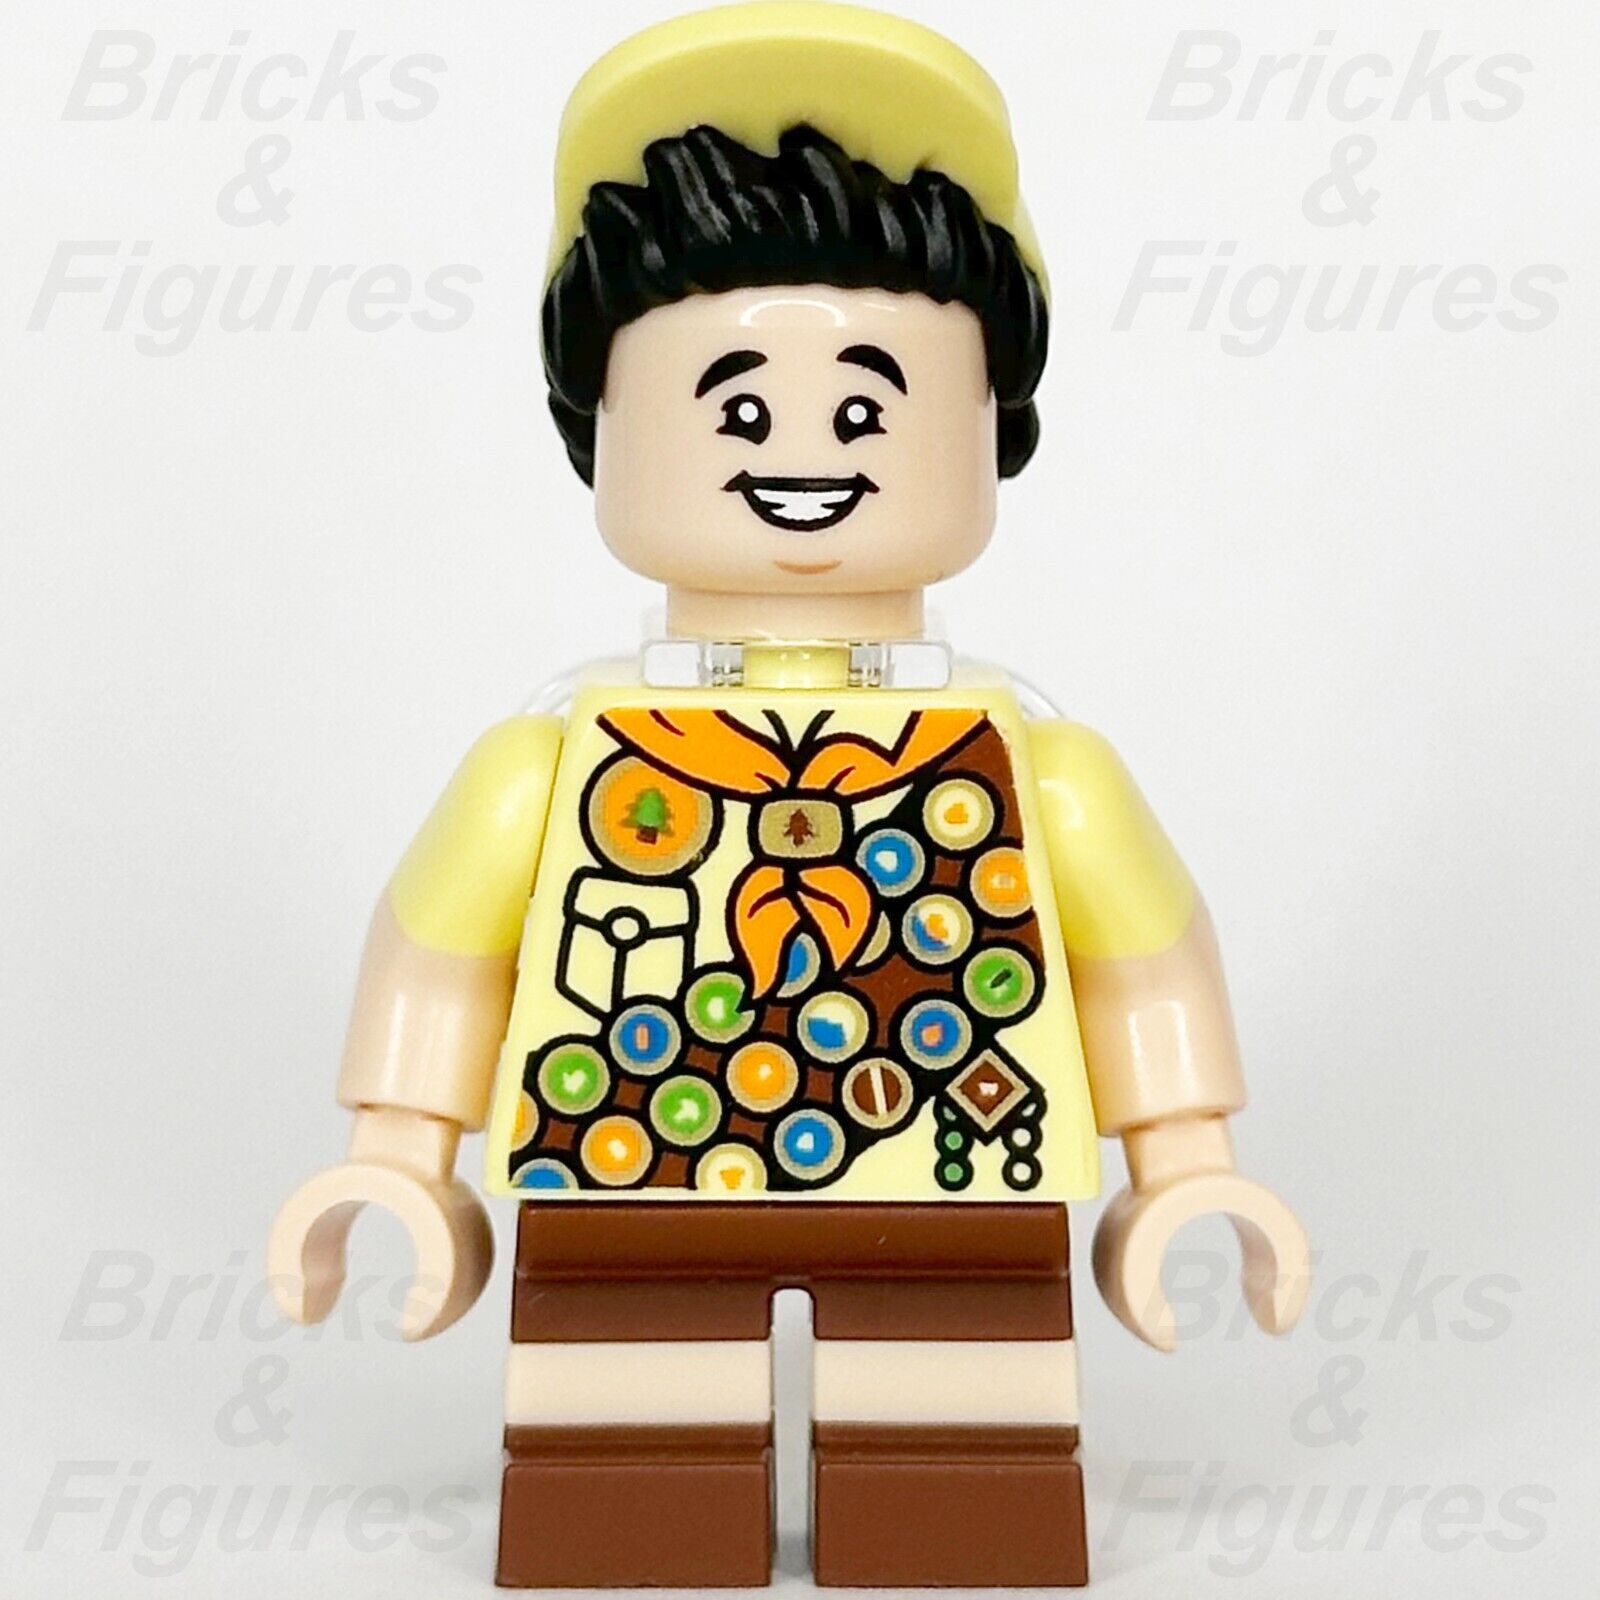 LEGO Disney Russell Minifigure Disney 100 UP 43217 dis090 Young Boy Minifig